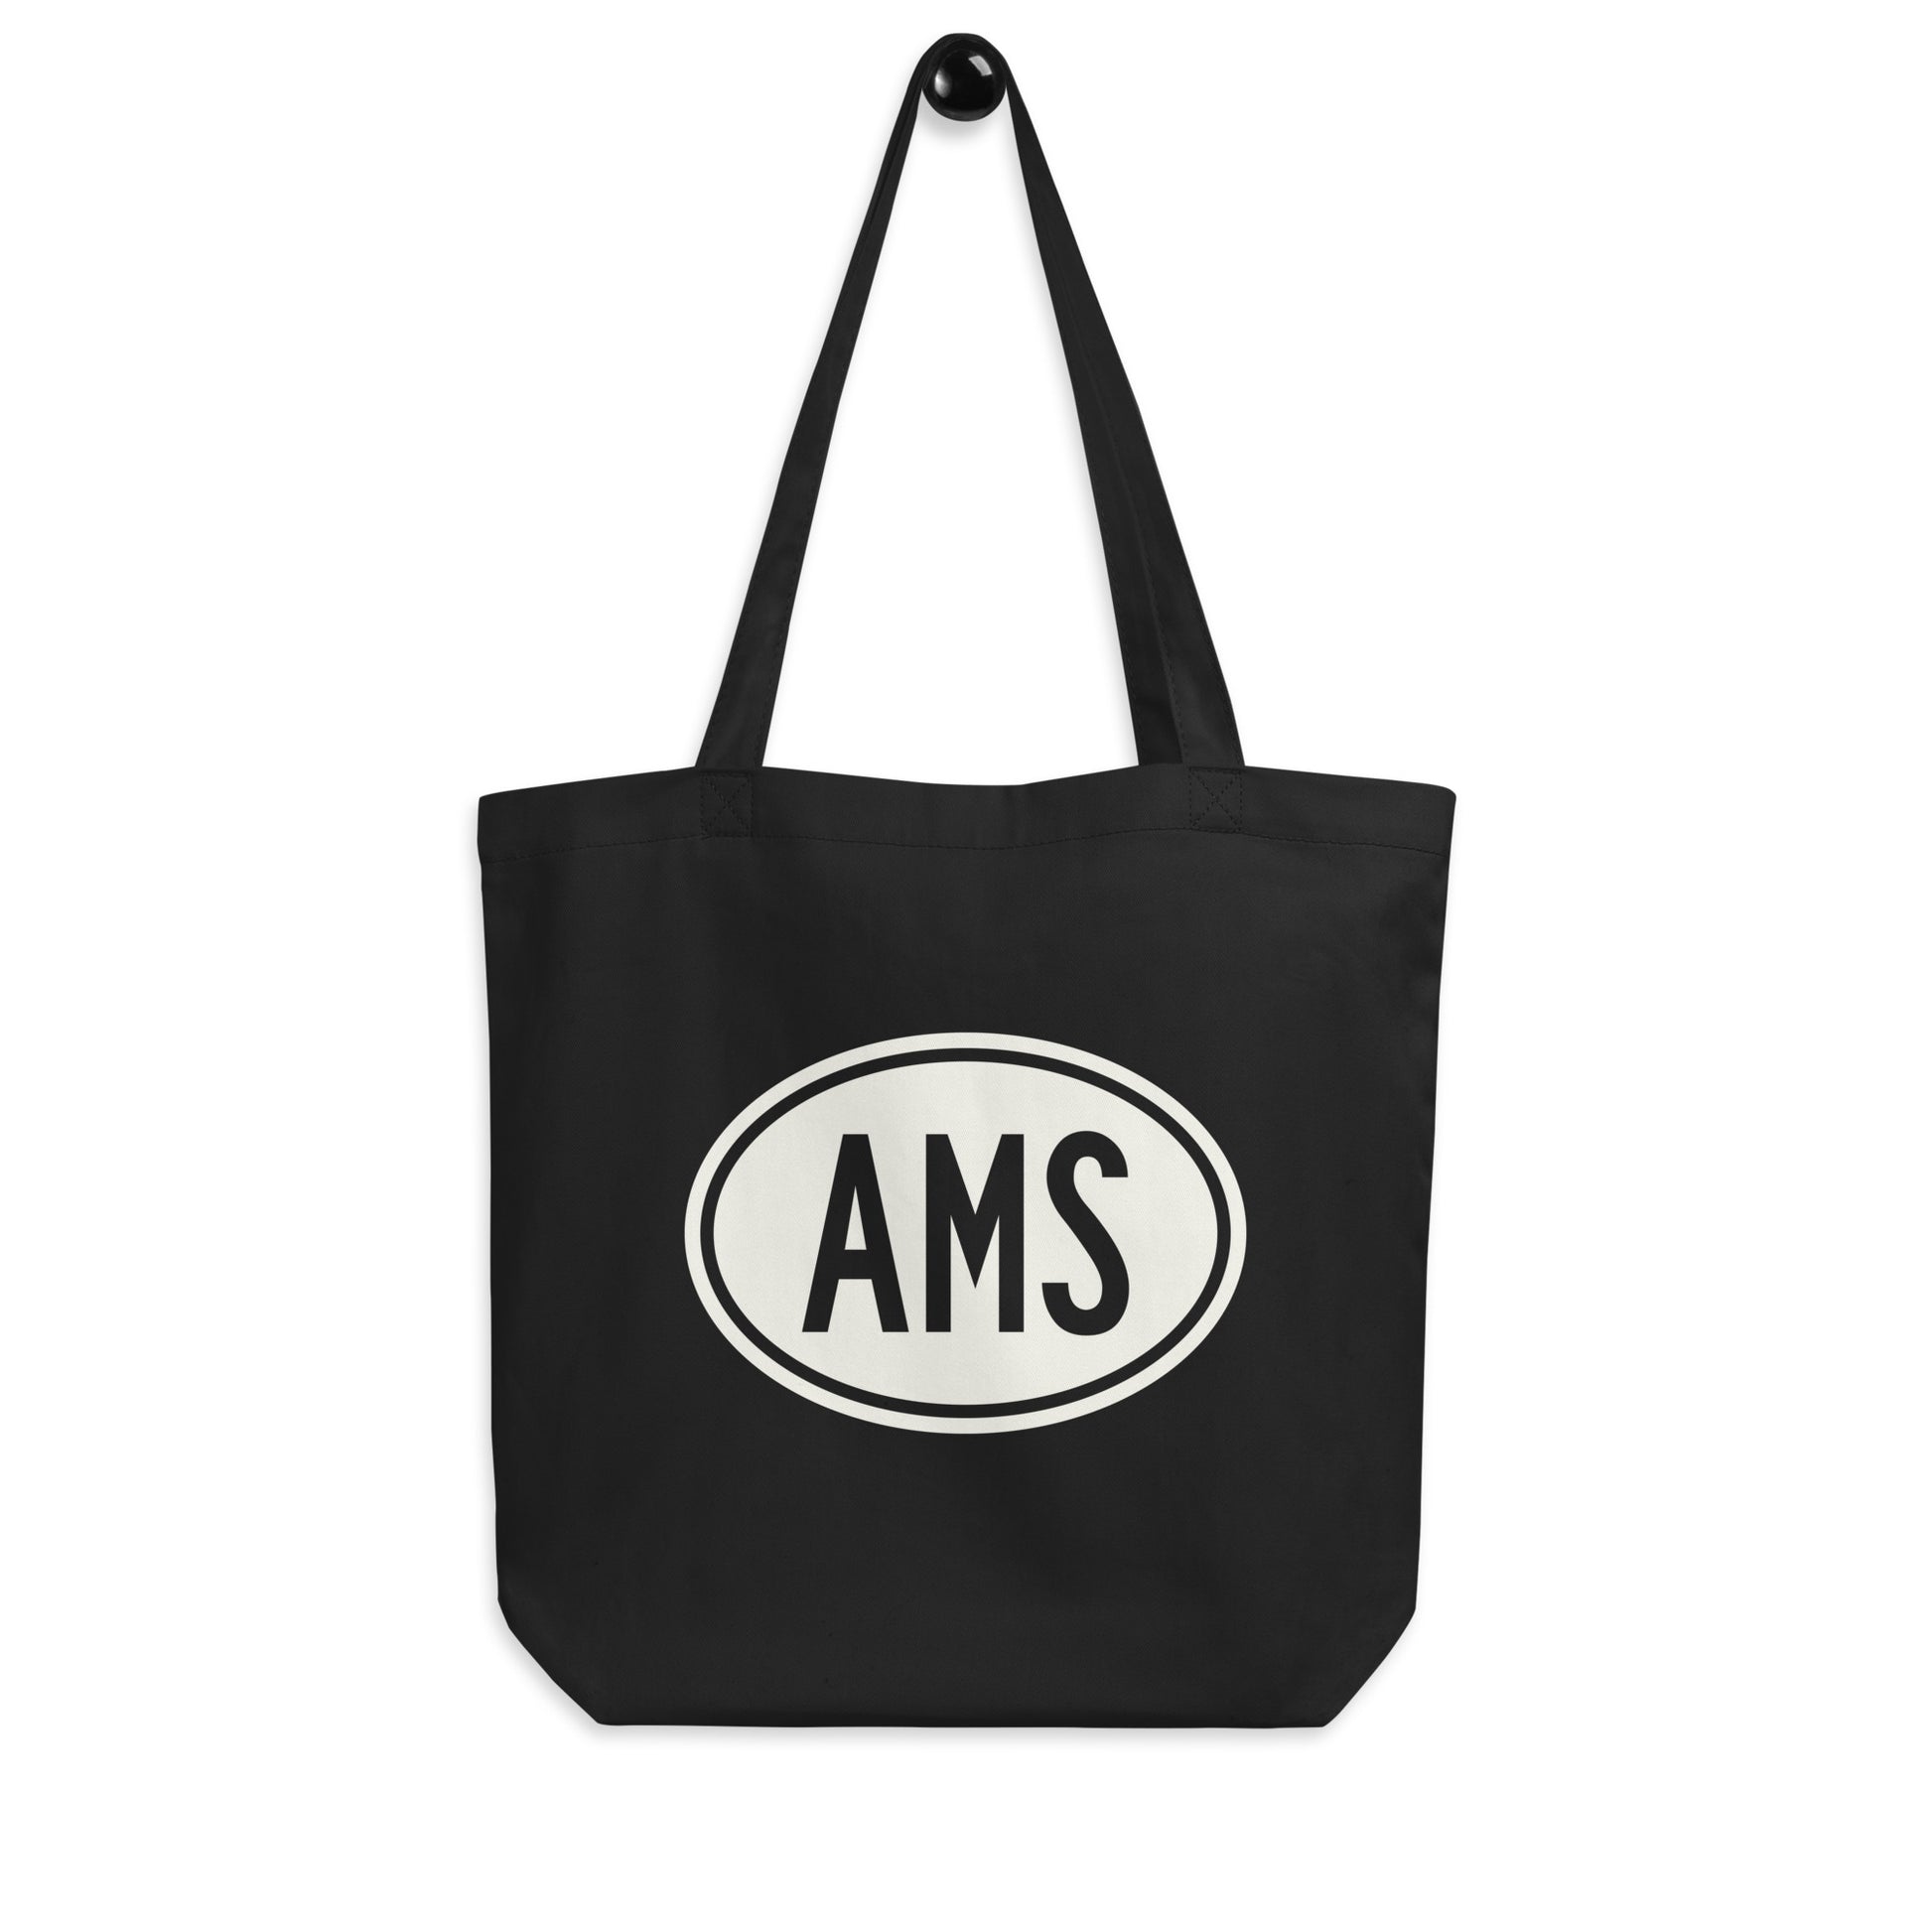 Unique Travel Gift Organic Tote - White Oval • AMS Amsterdam • YHM Designs - Image 04